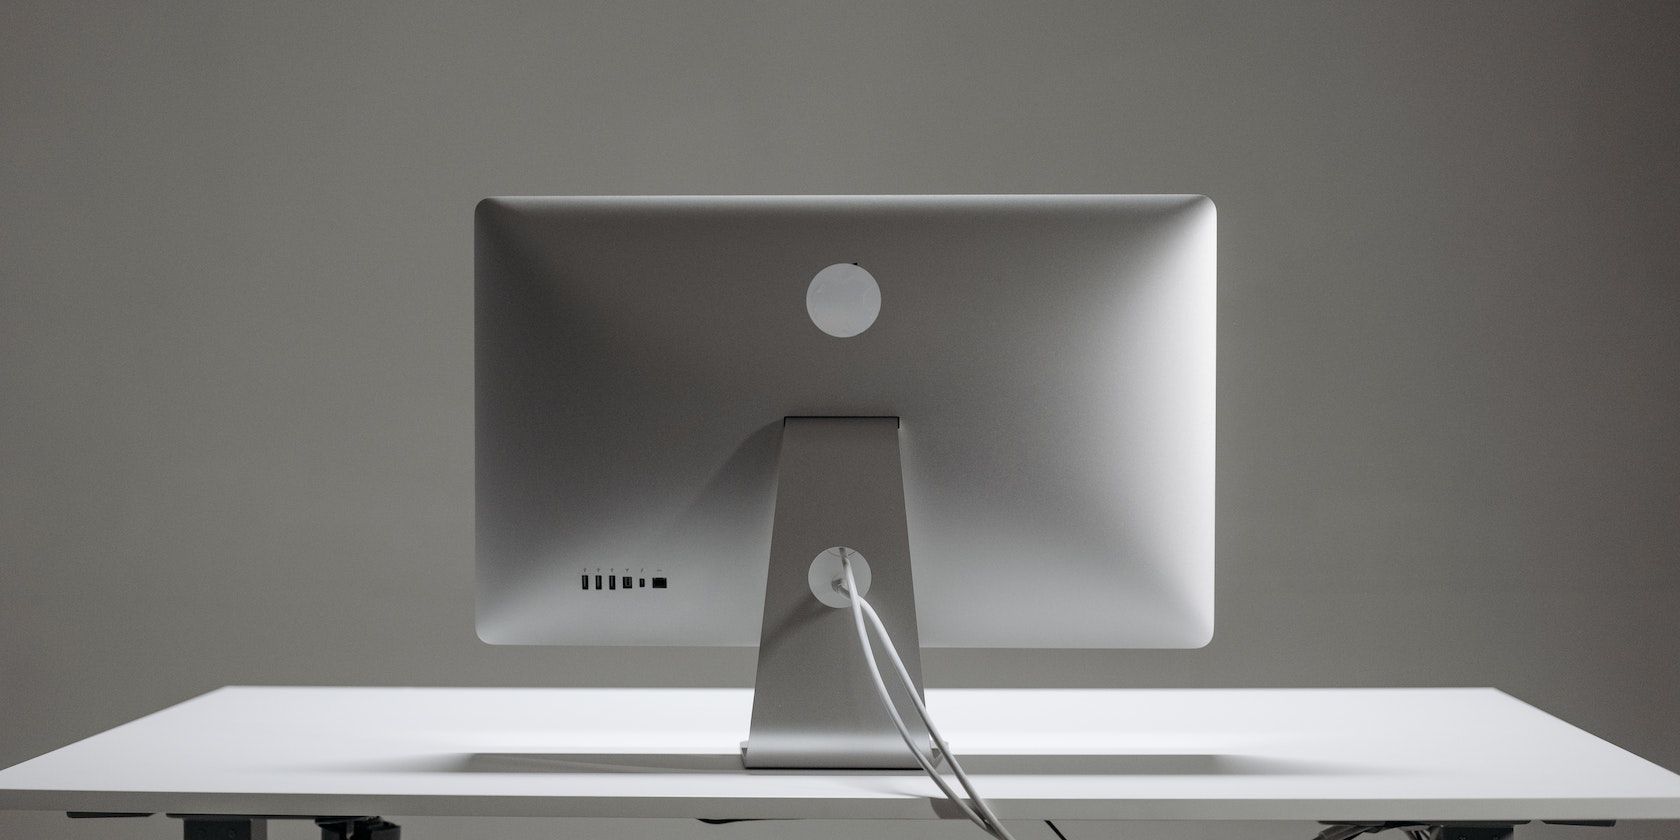 A clean iMac on the desk